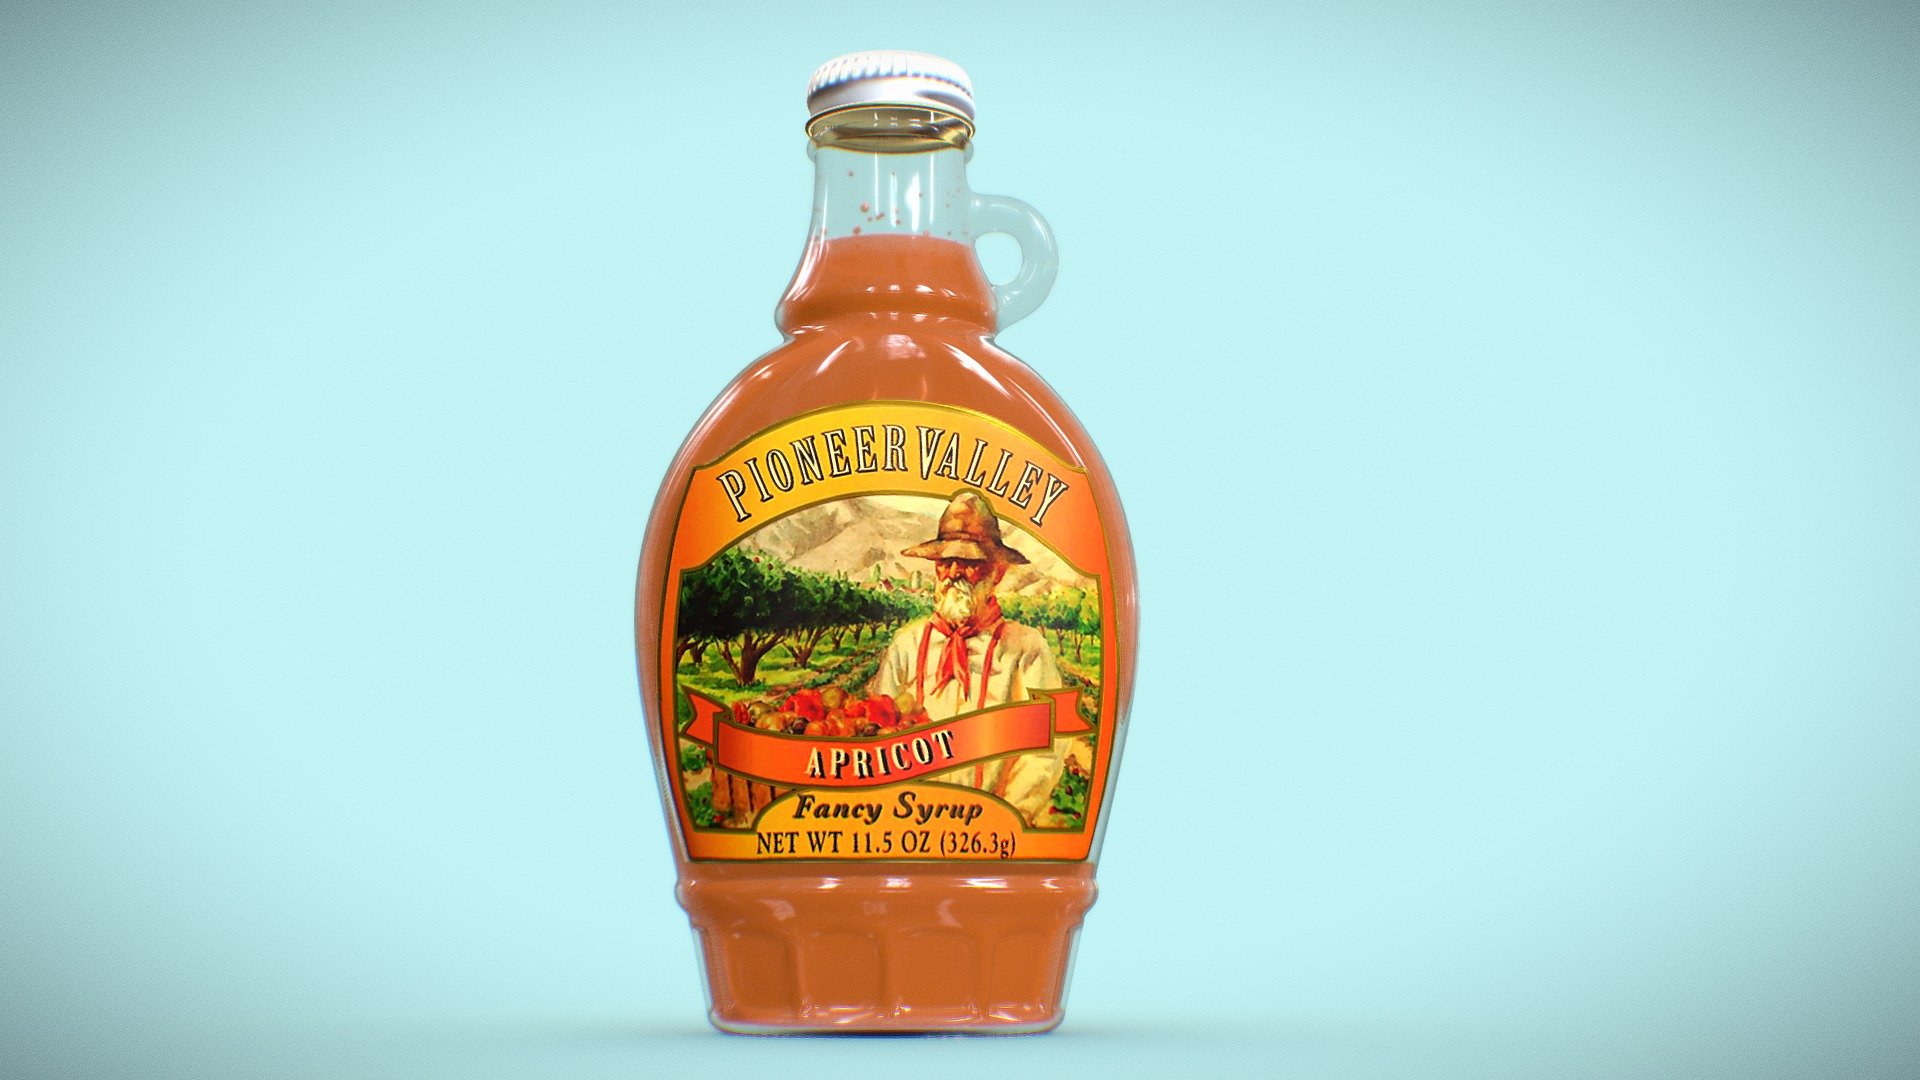 Apricot Syrup Bottle 375ml with a cap and labels. The entire model was made whith 3ds Max and texturized in Substance Painter. 
Full PBR texture pack it's included. All part pivots are in 0;0;0 xyz coordinates.

FBX and OBJ file formats are compatible with software:
All Autodesk programs, such as: Maya, 3D Max, Mudbox,
AutoCAD, Inventor, MotionBuilder, Revit, Softimage, Alias etc.;
ZBrush, MODO, 3D Coat, Adobe Photoshop, Keyshot,
Rhinoceros, SketchUp, NewTek Lightwave, Vue xStream,
SolidWorks, Houdini, Blender, Unreal Engine etc 3d model